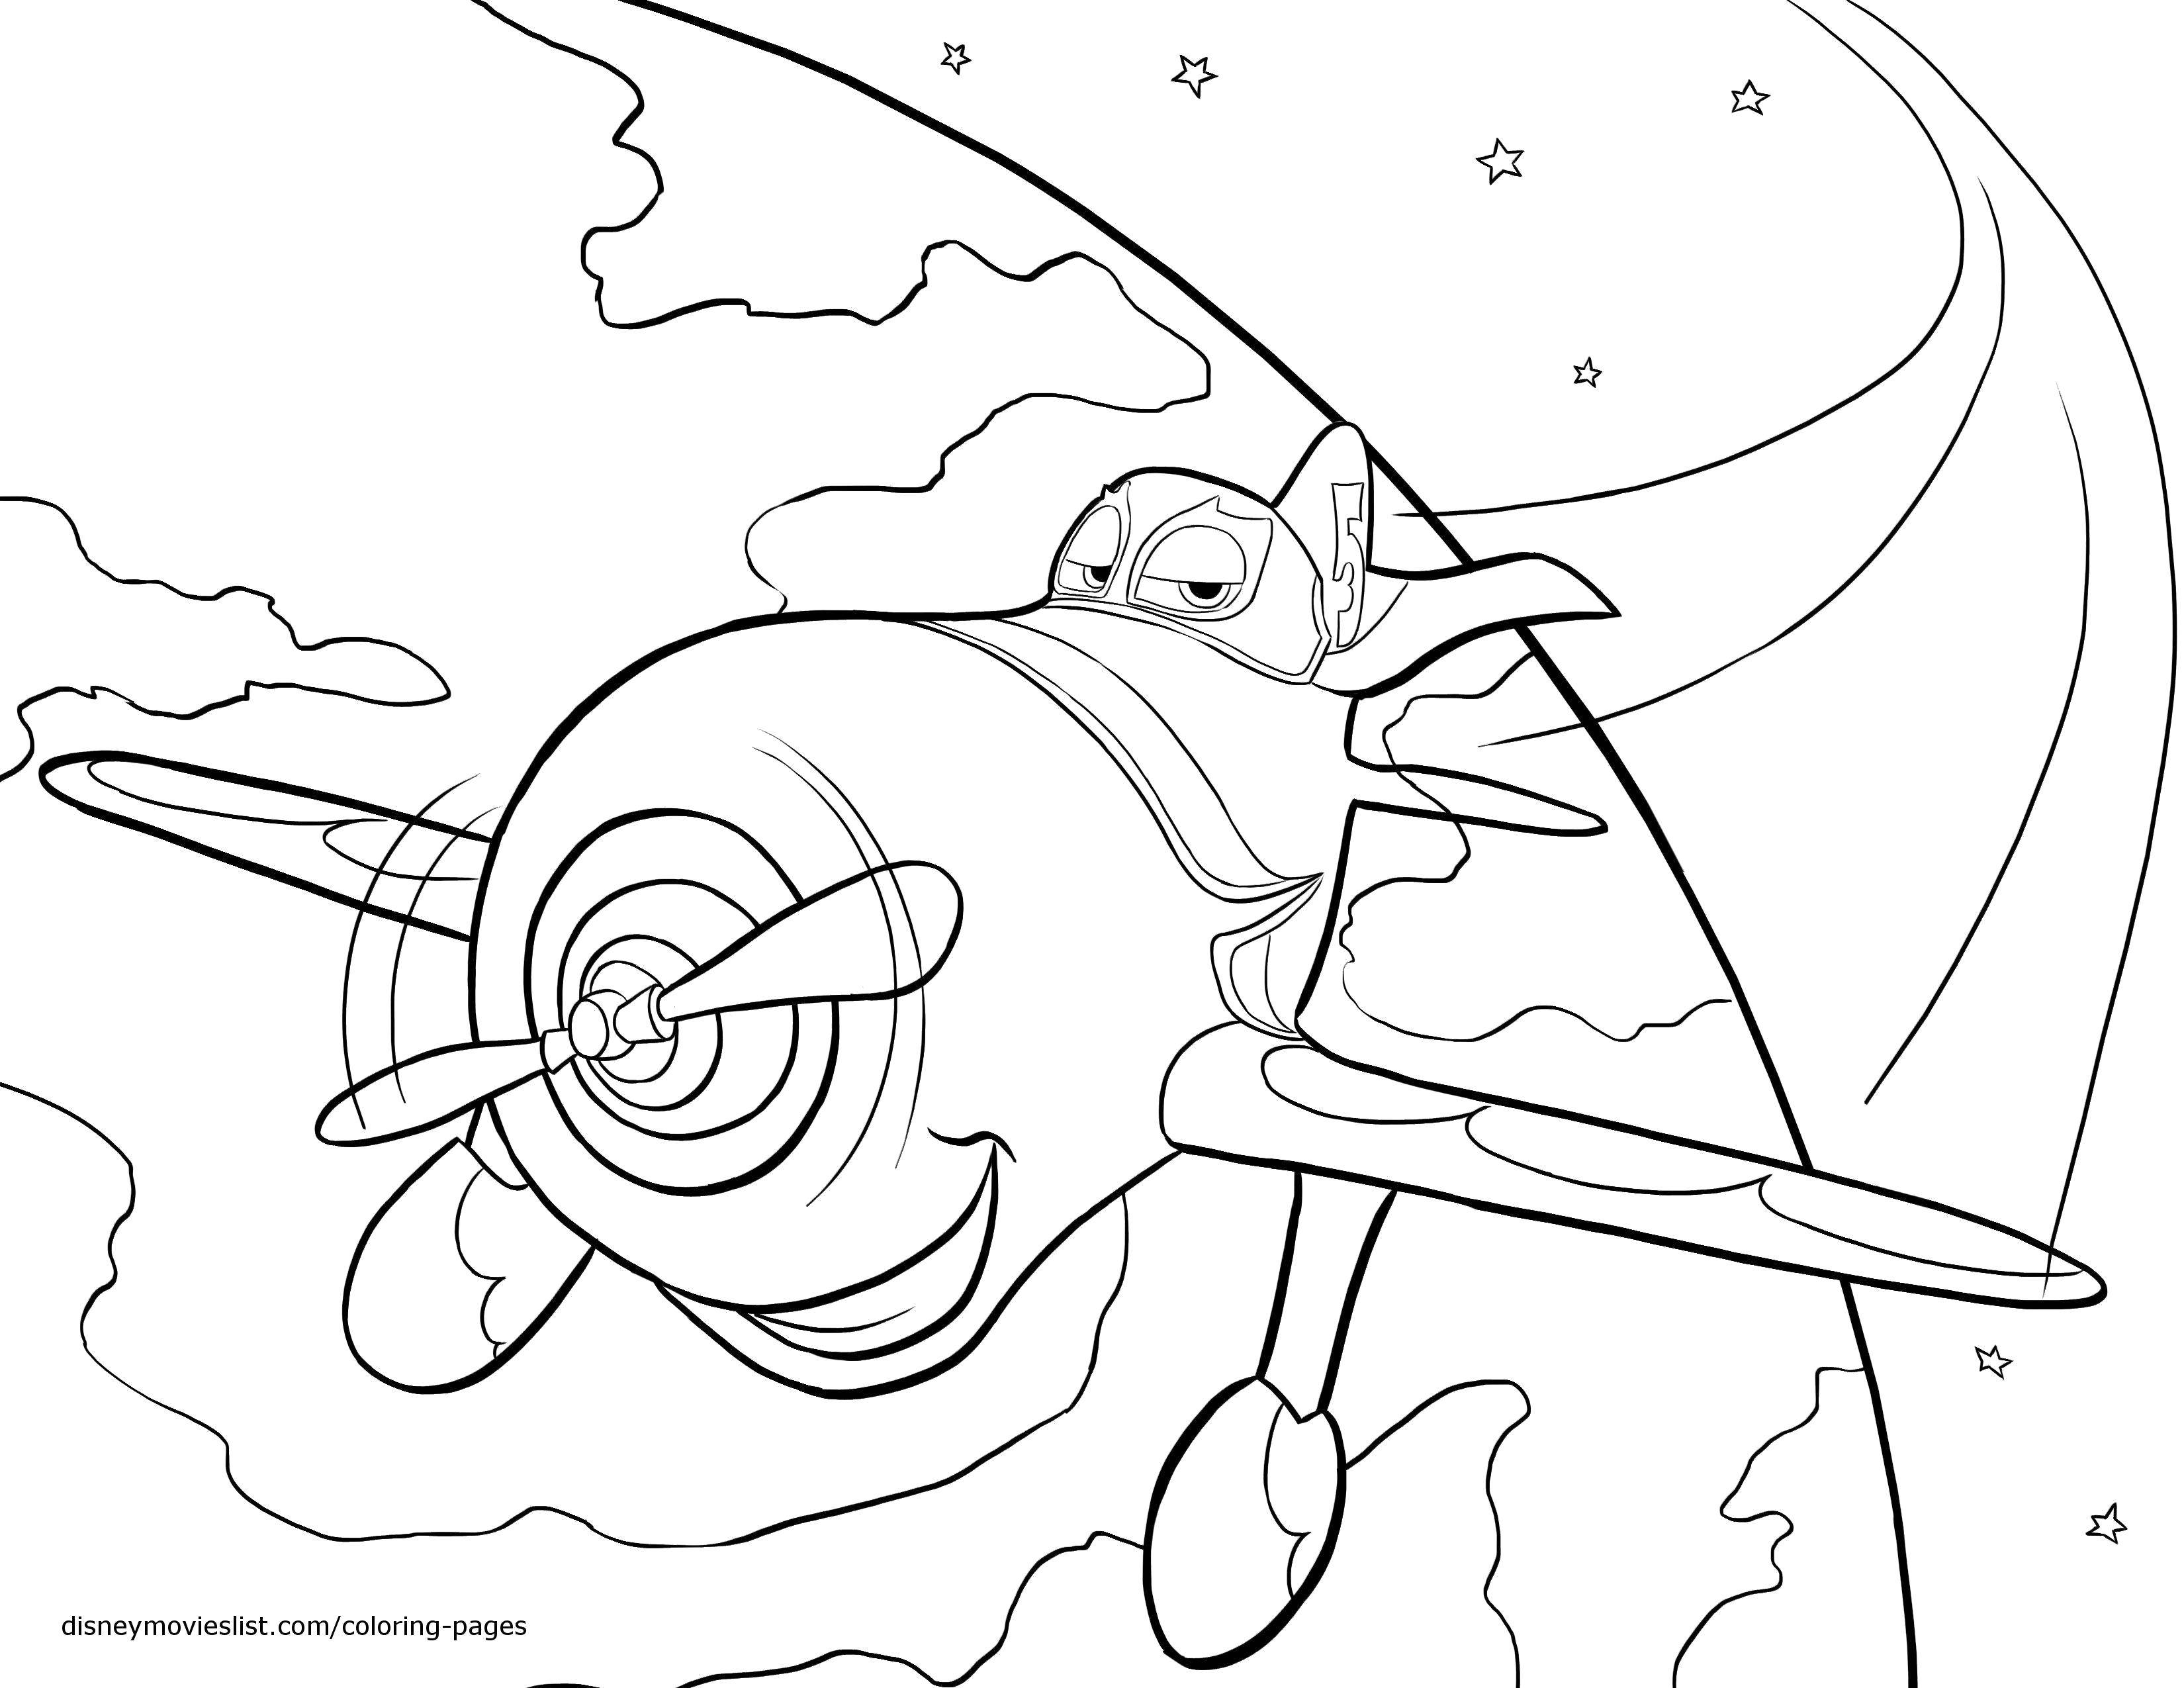 Coloring Plane cartoon. Category The planes. Tags:  Cartoon character.